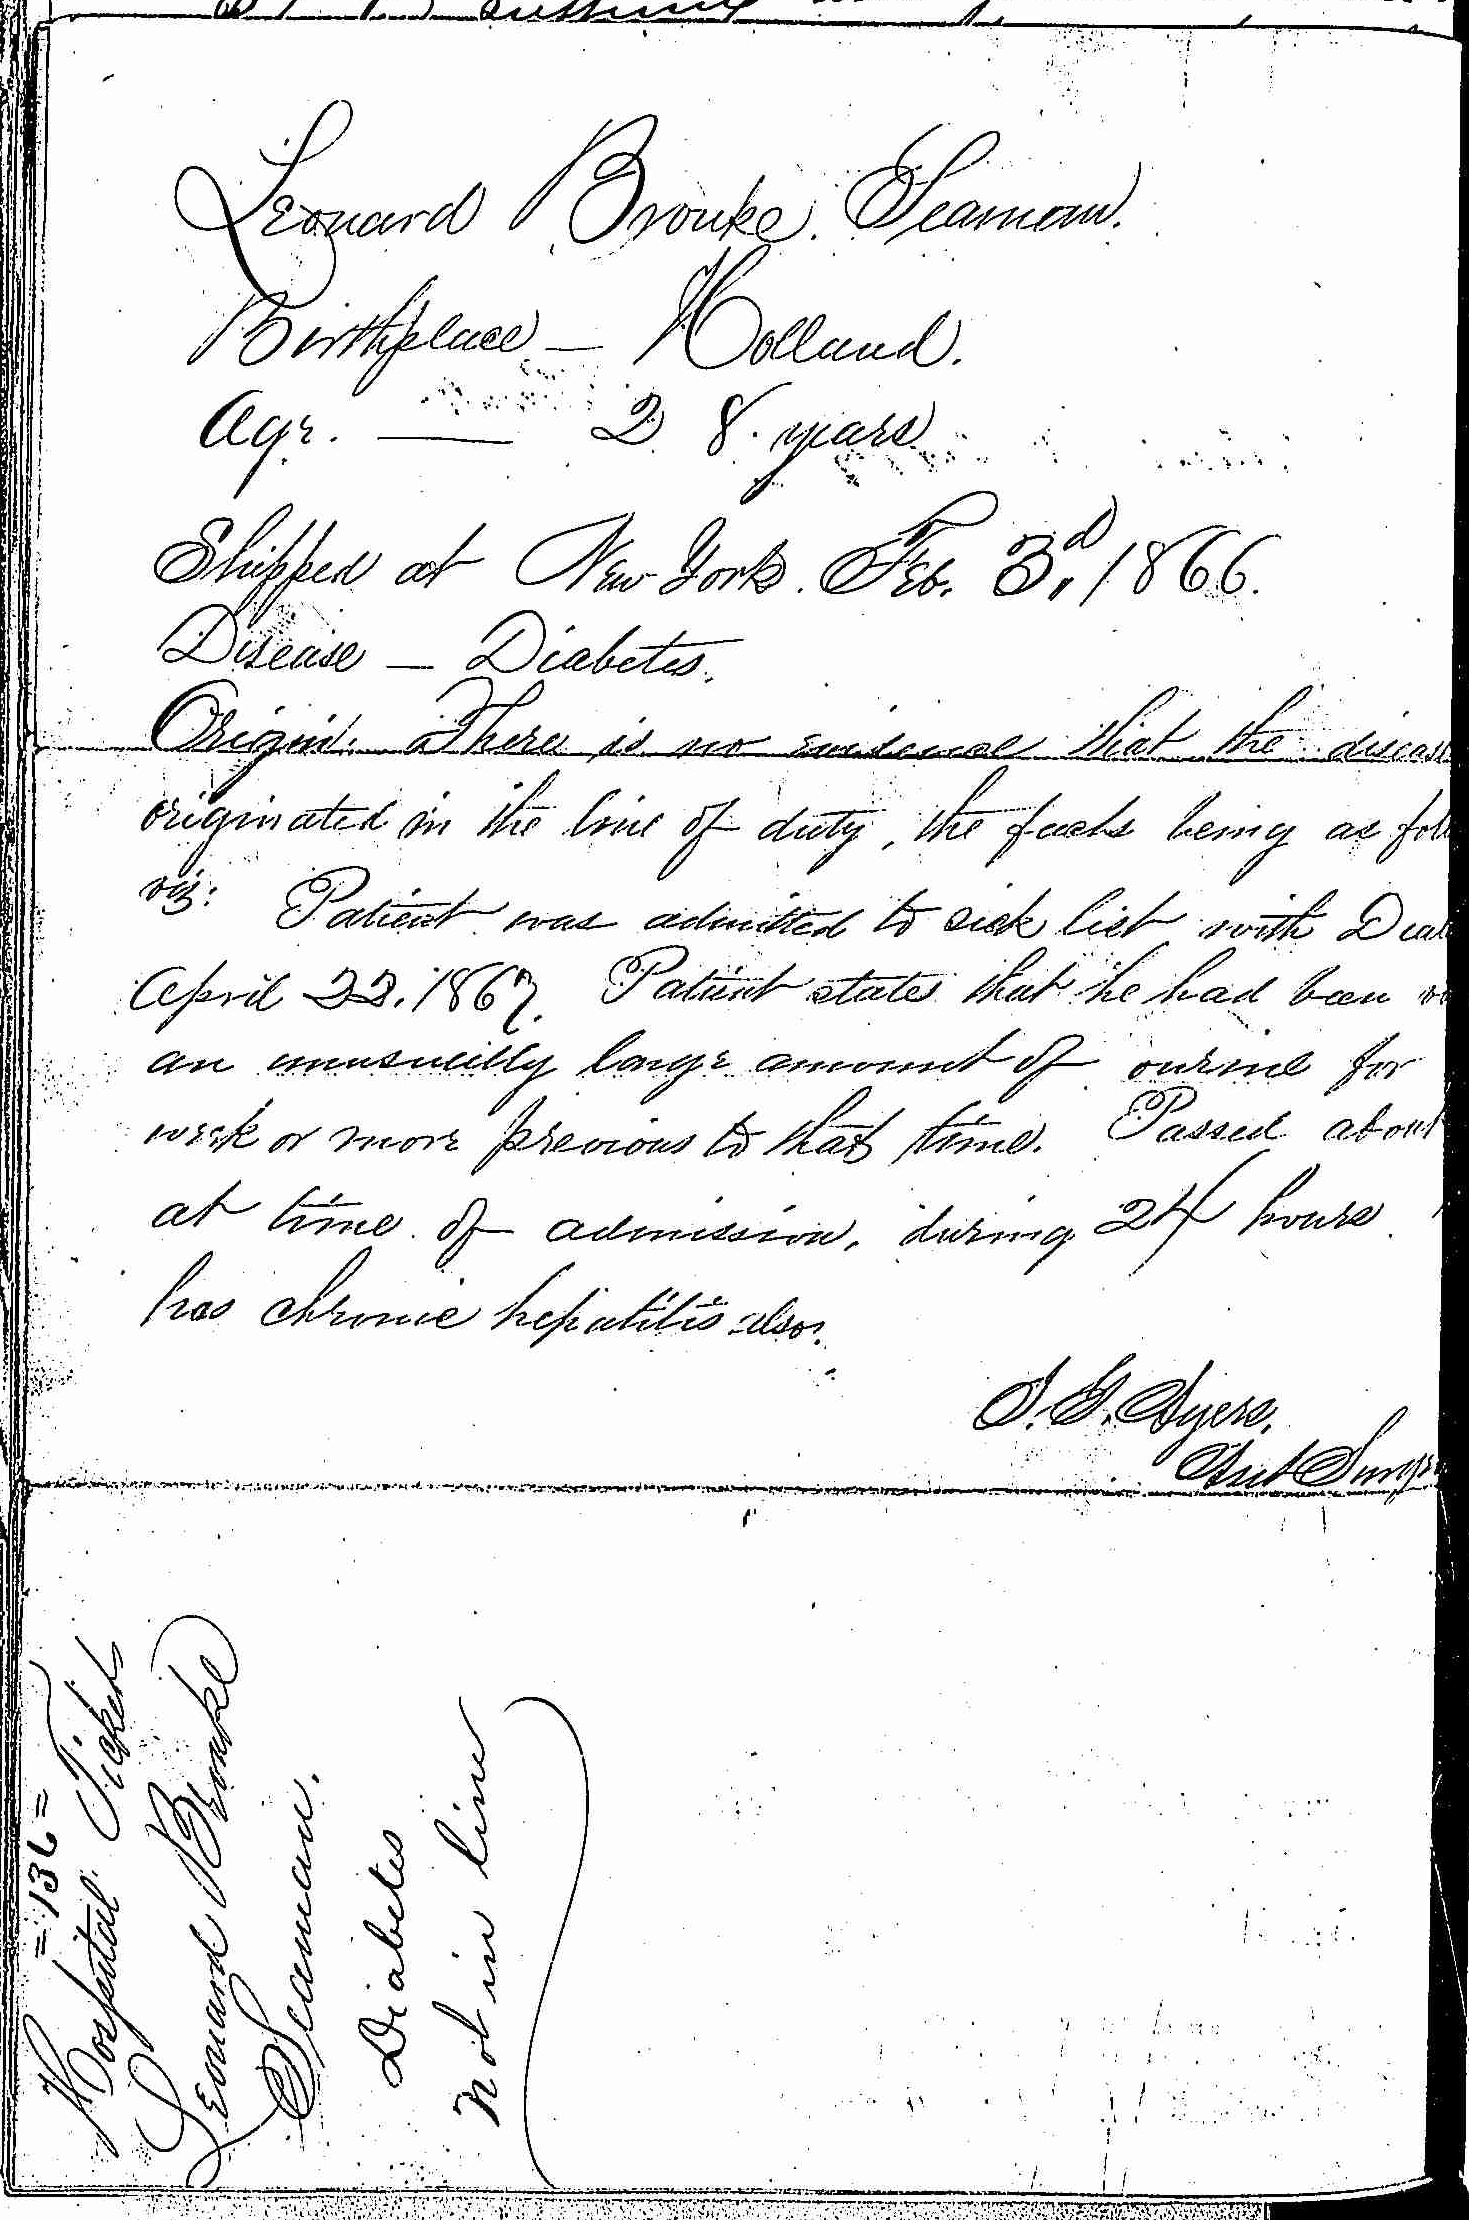 Entry for Leonard Bourke (page 2 of 2) in the log Hospital Tickets and Case Papers - Naval Hospital - Washington, D.C. - 1866-68